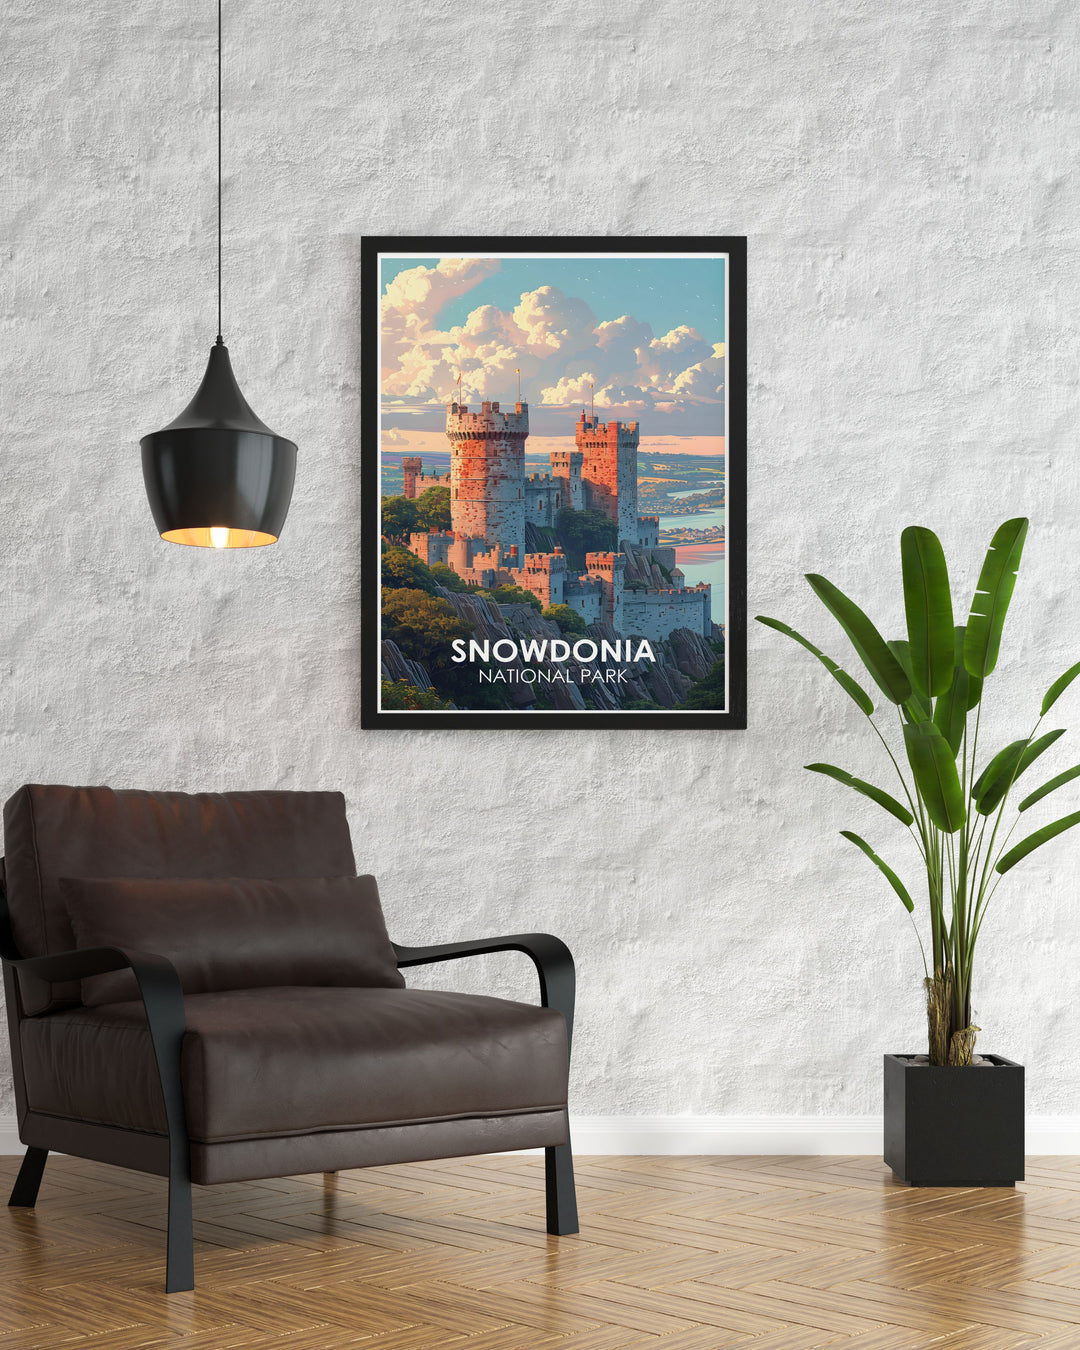 Conwy Castle travel poster capturing the grandeur of this medieval fortress against the backdrop of Snowdonias breathtaking scenery a must have for history lovers and home decor enthusiasts